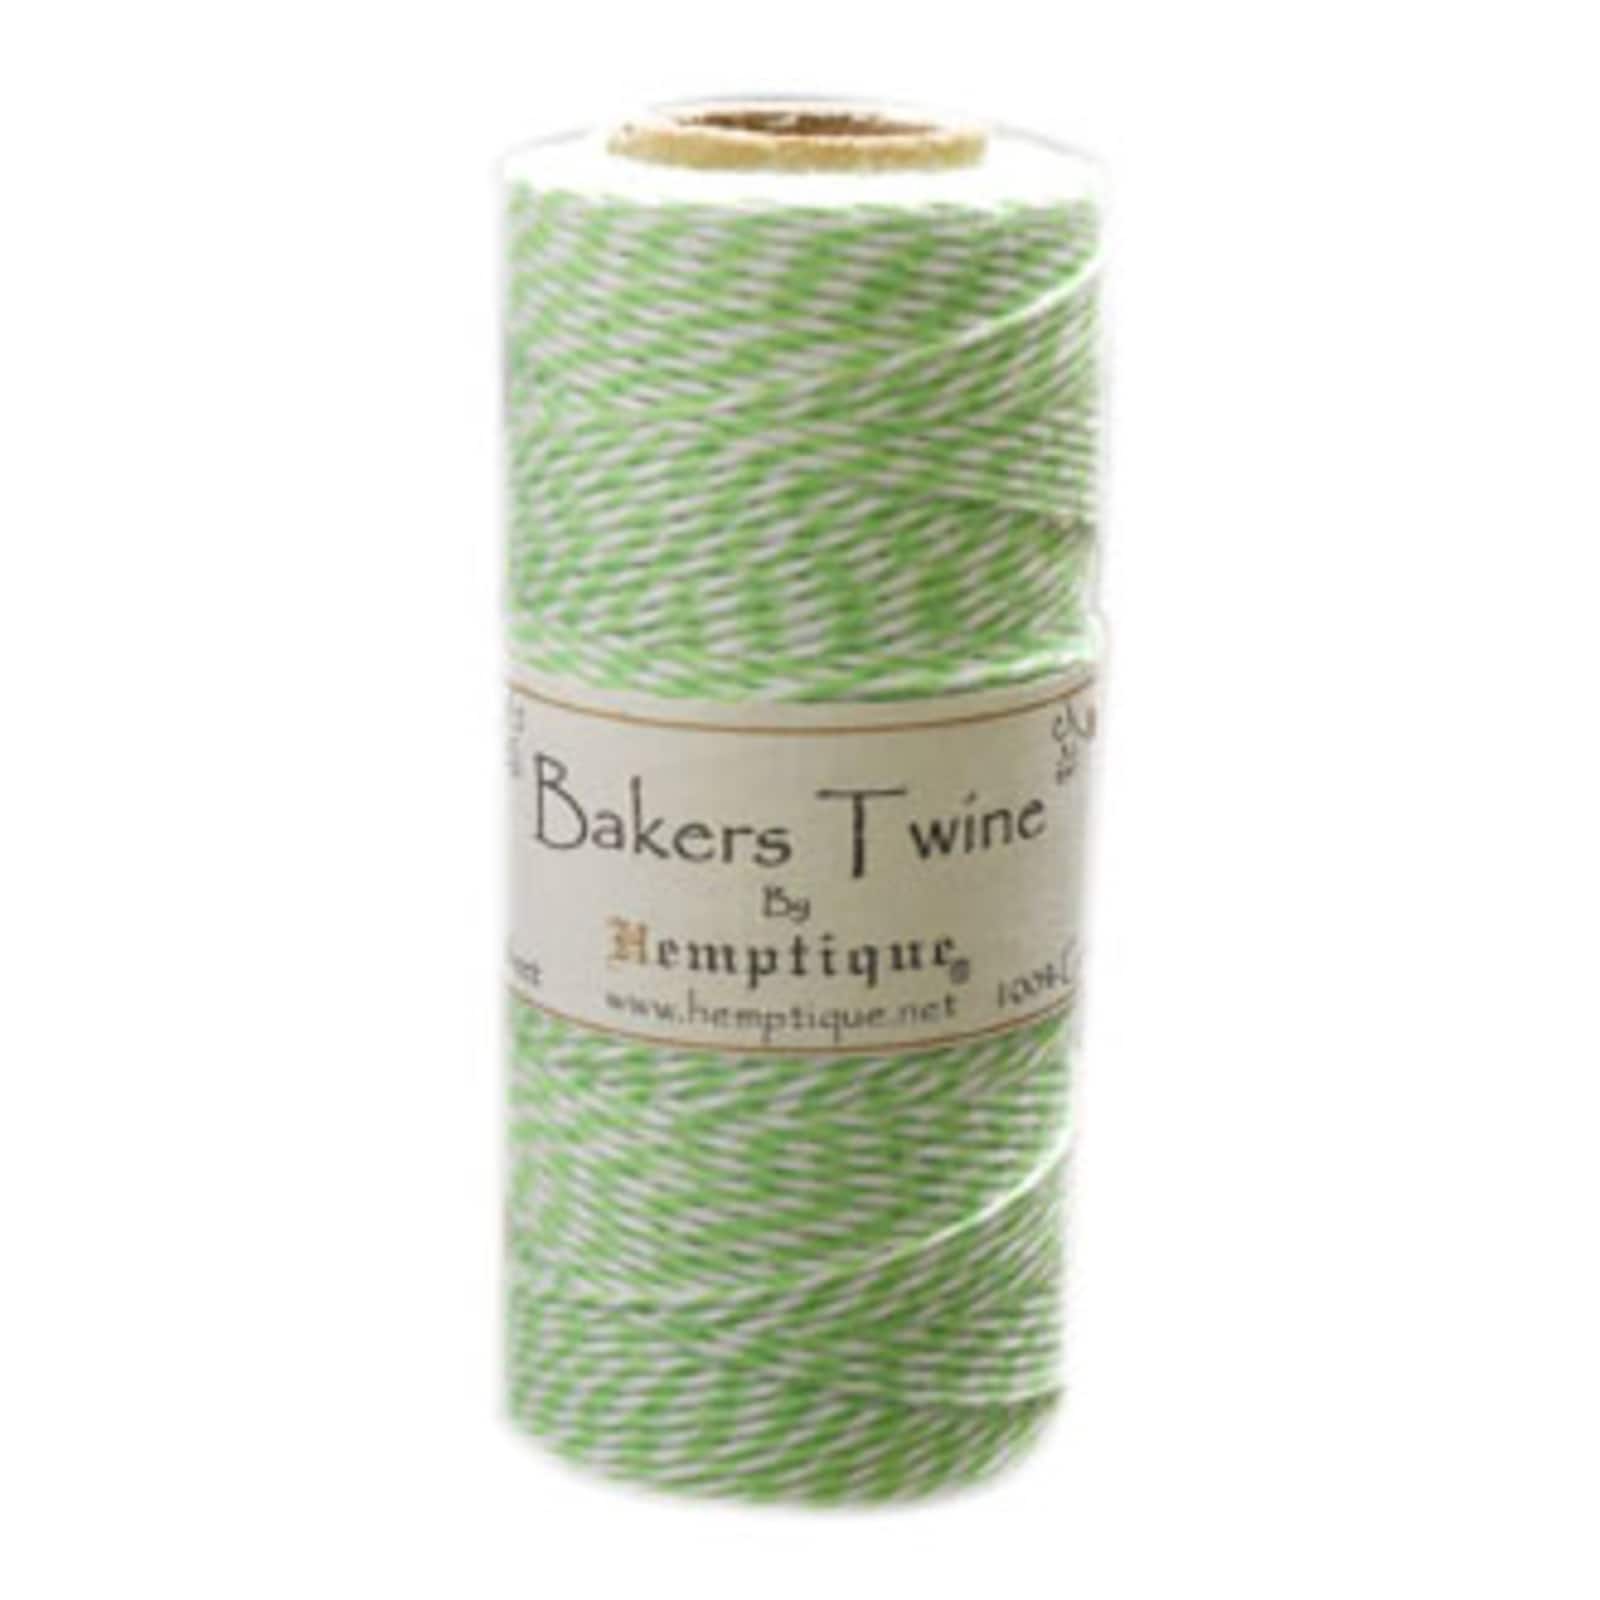 Wood Spool of String, Baker's Twine, Colored Twine, Craft Twine